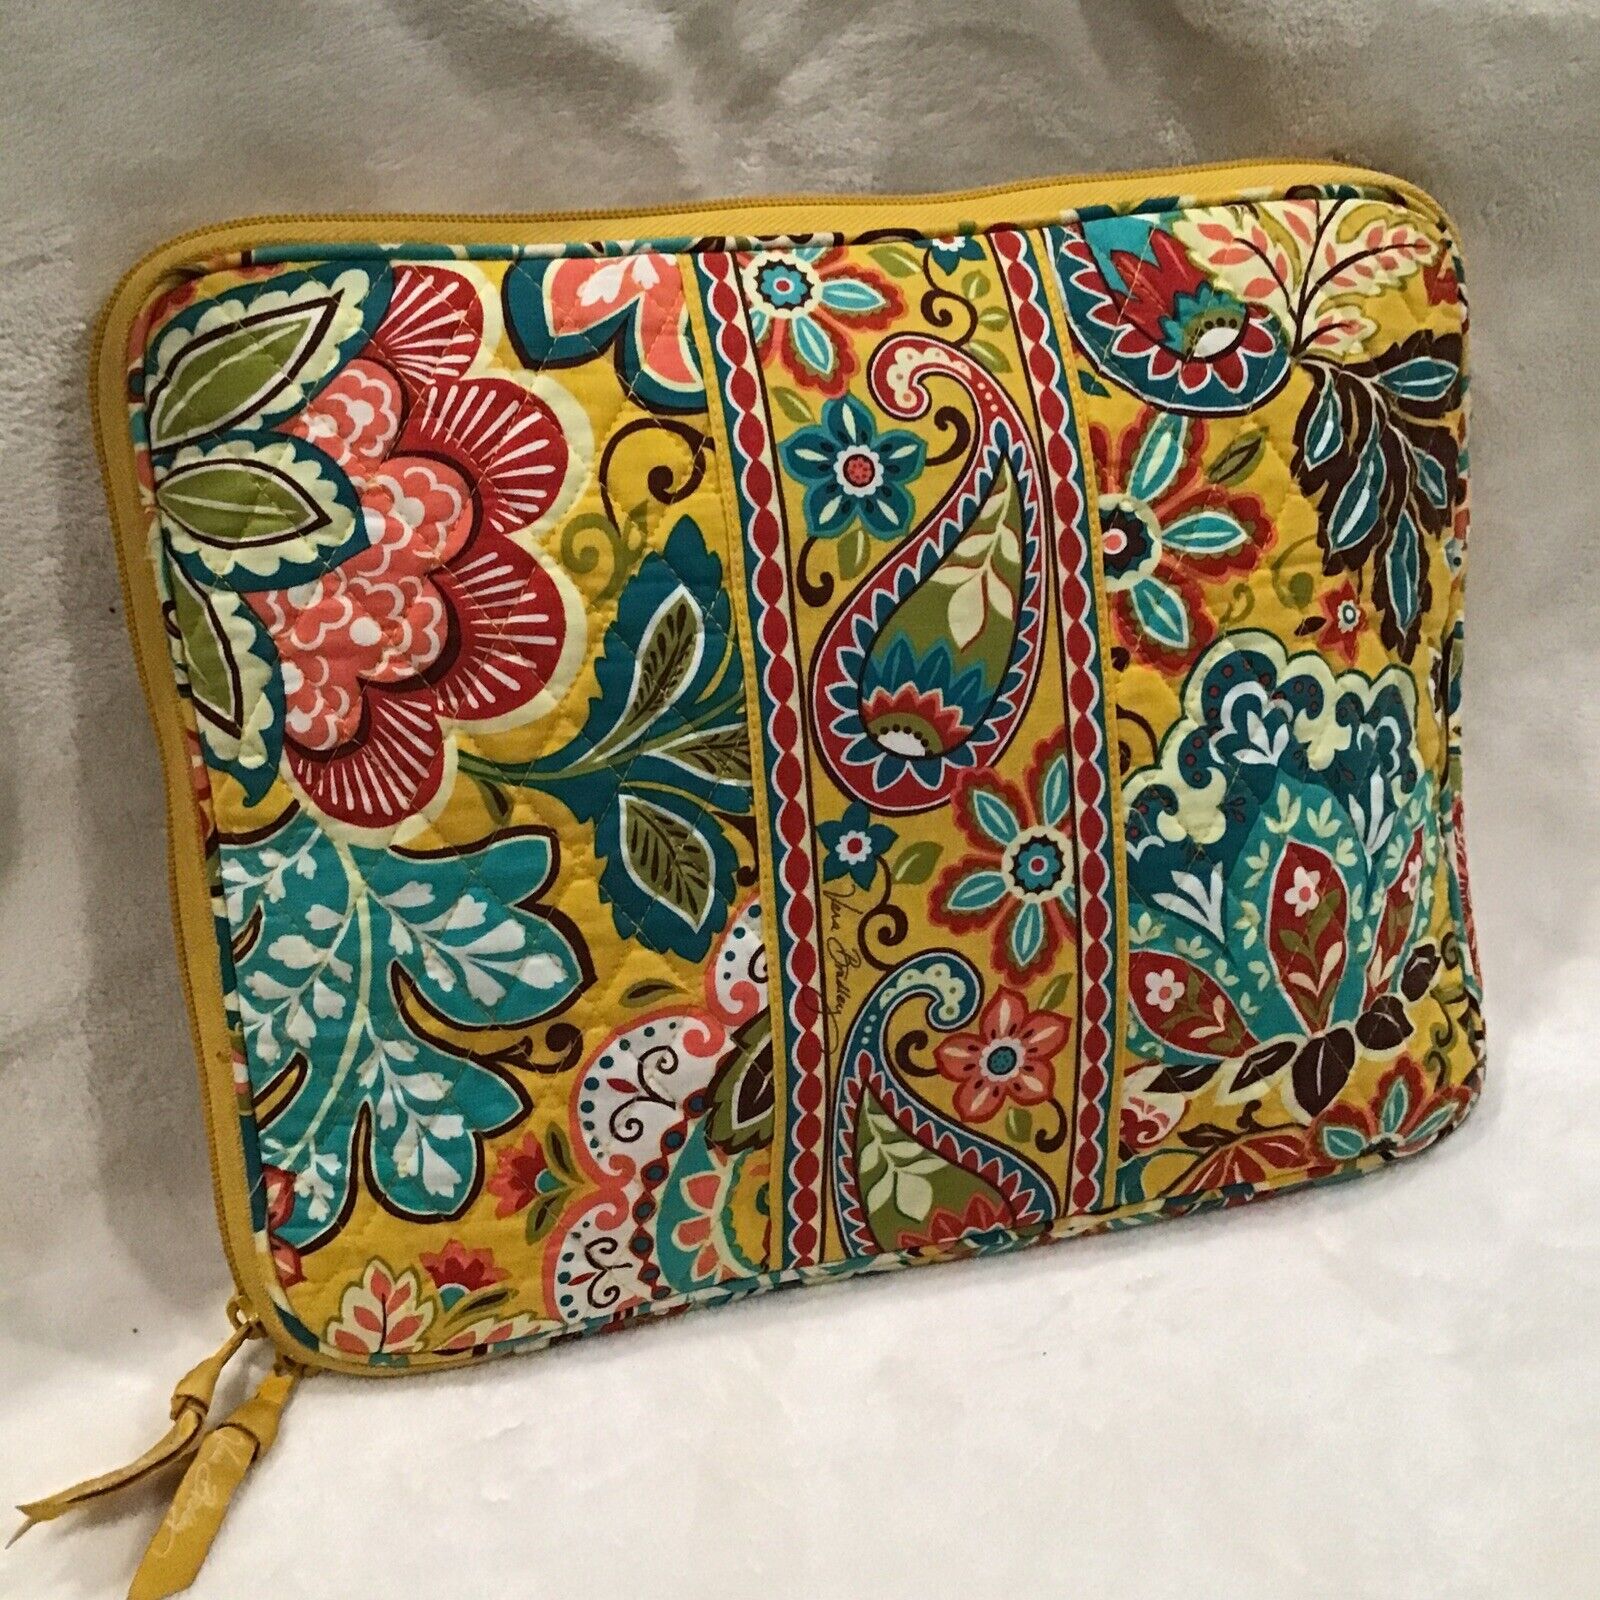 Vera Bradley Tablet Laptop Cover Provencial Yellow Floral Paisley NWOT 